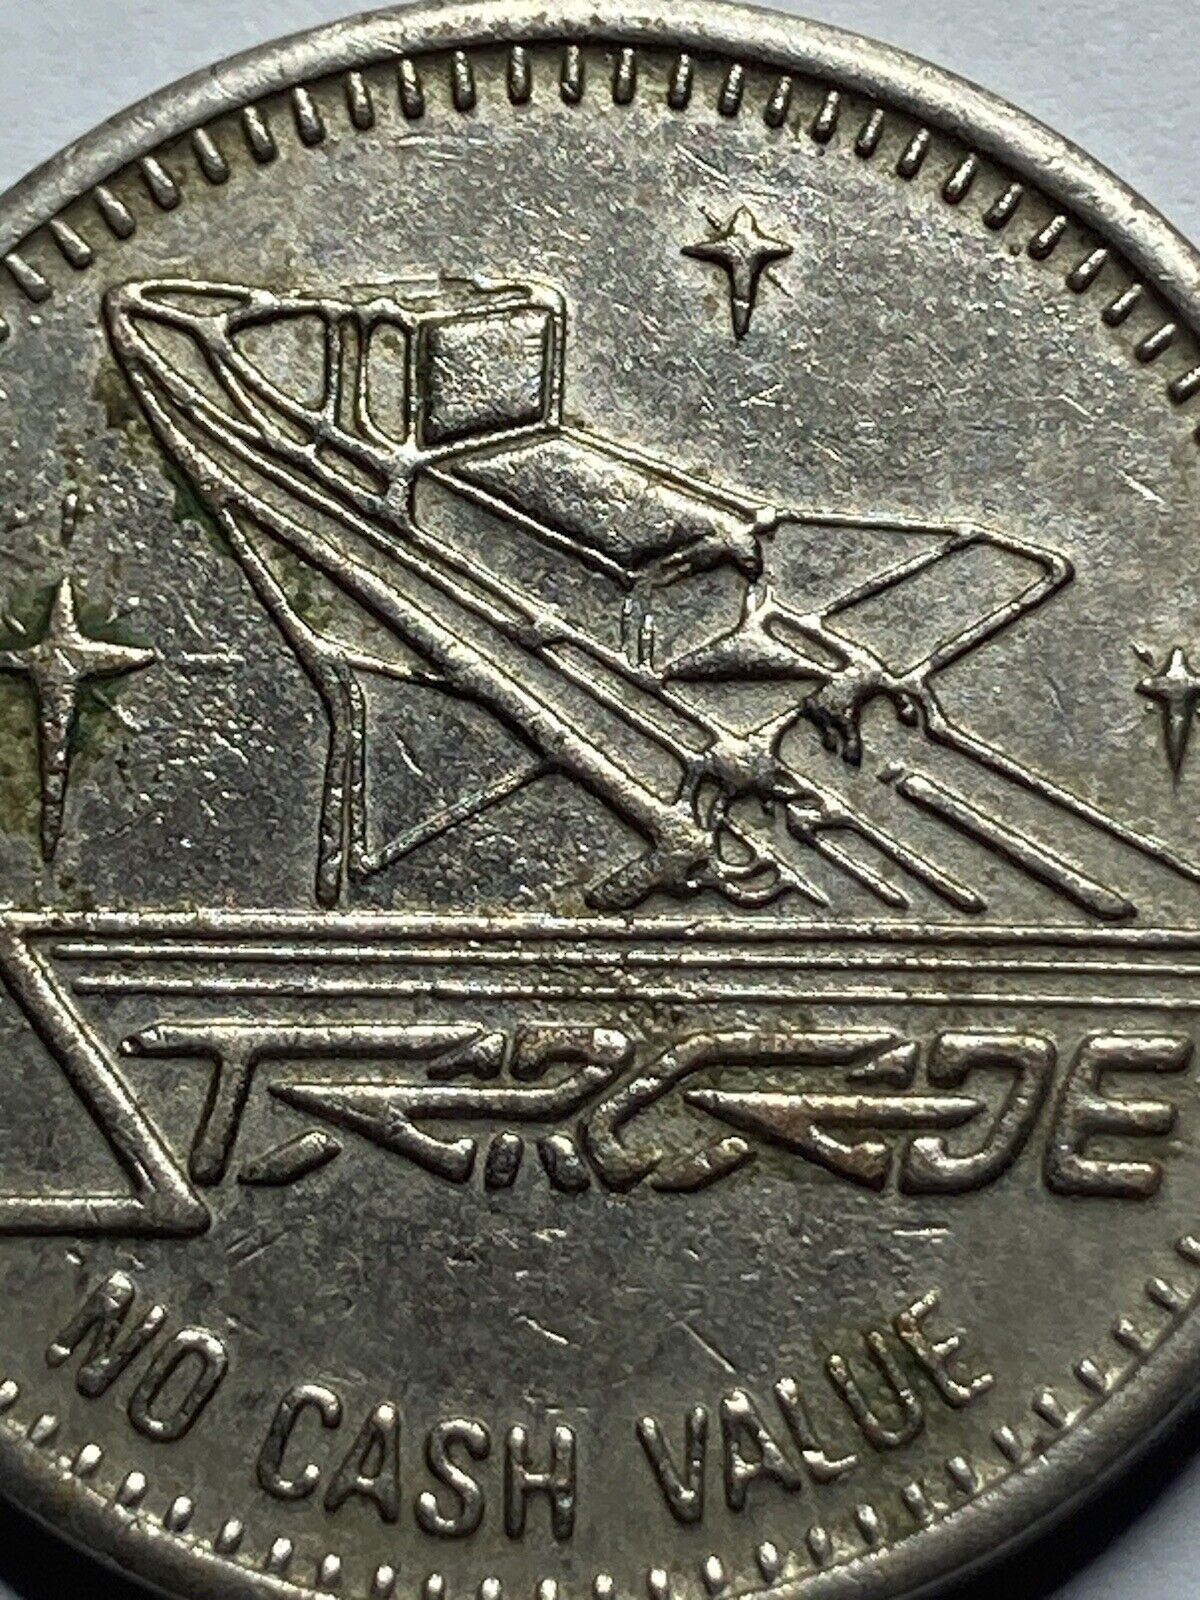 RARE AND BEAUTIFUL STARCADE VINTAGE TOKEN WITH SPACE SHUTTLE SILVER TONE (#01)